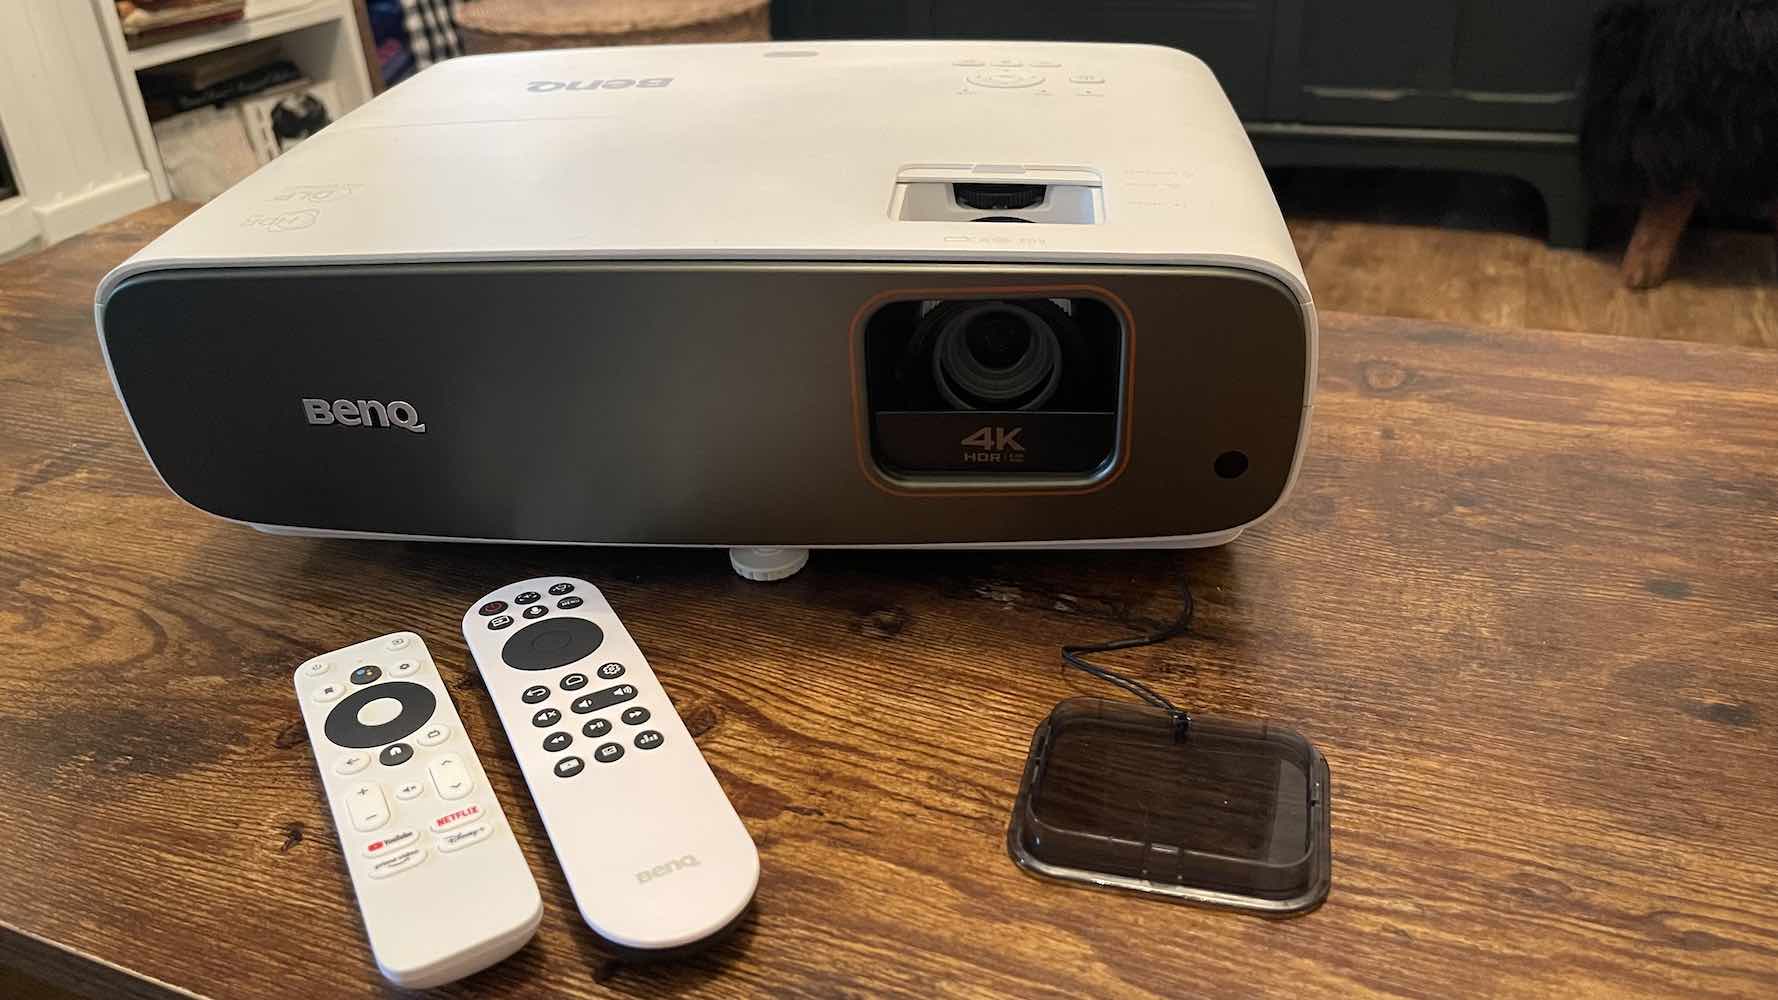 BenQ projector for the holidays